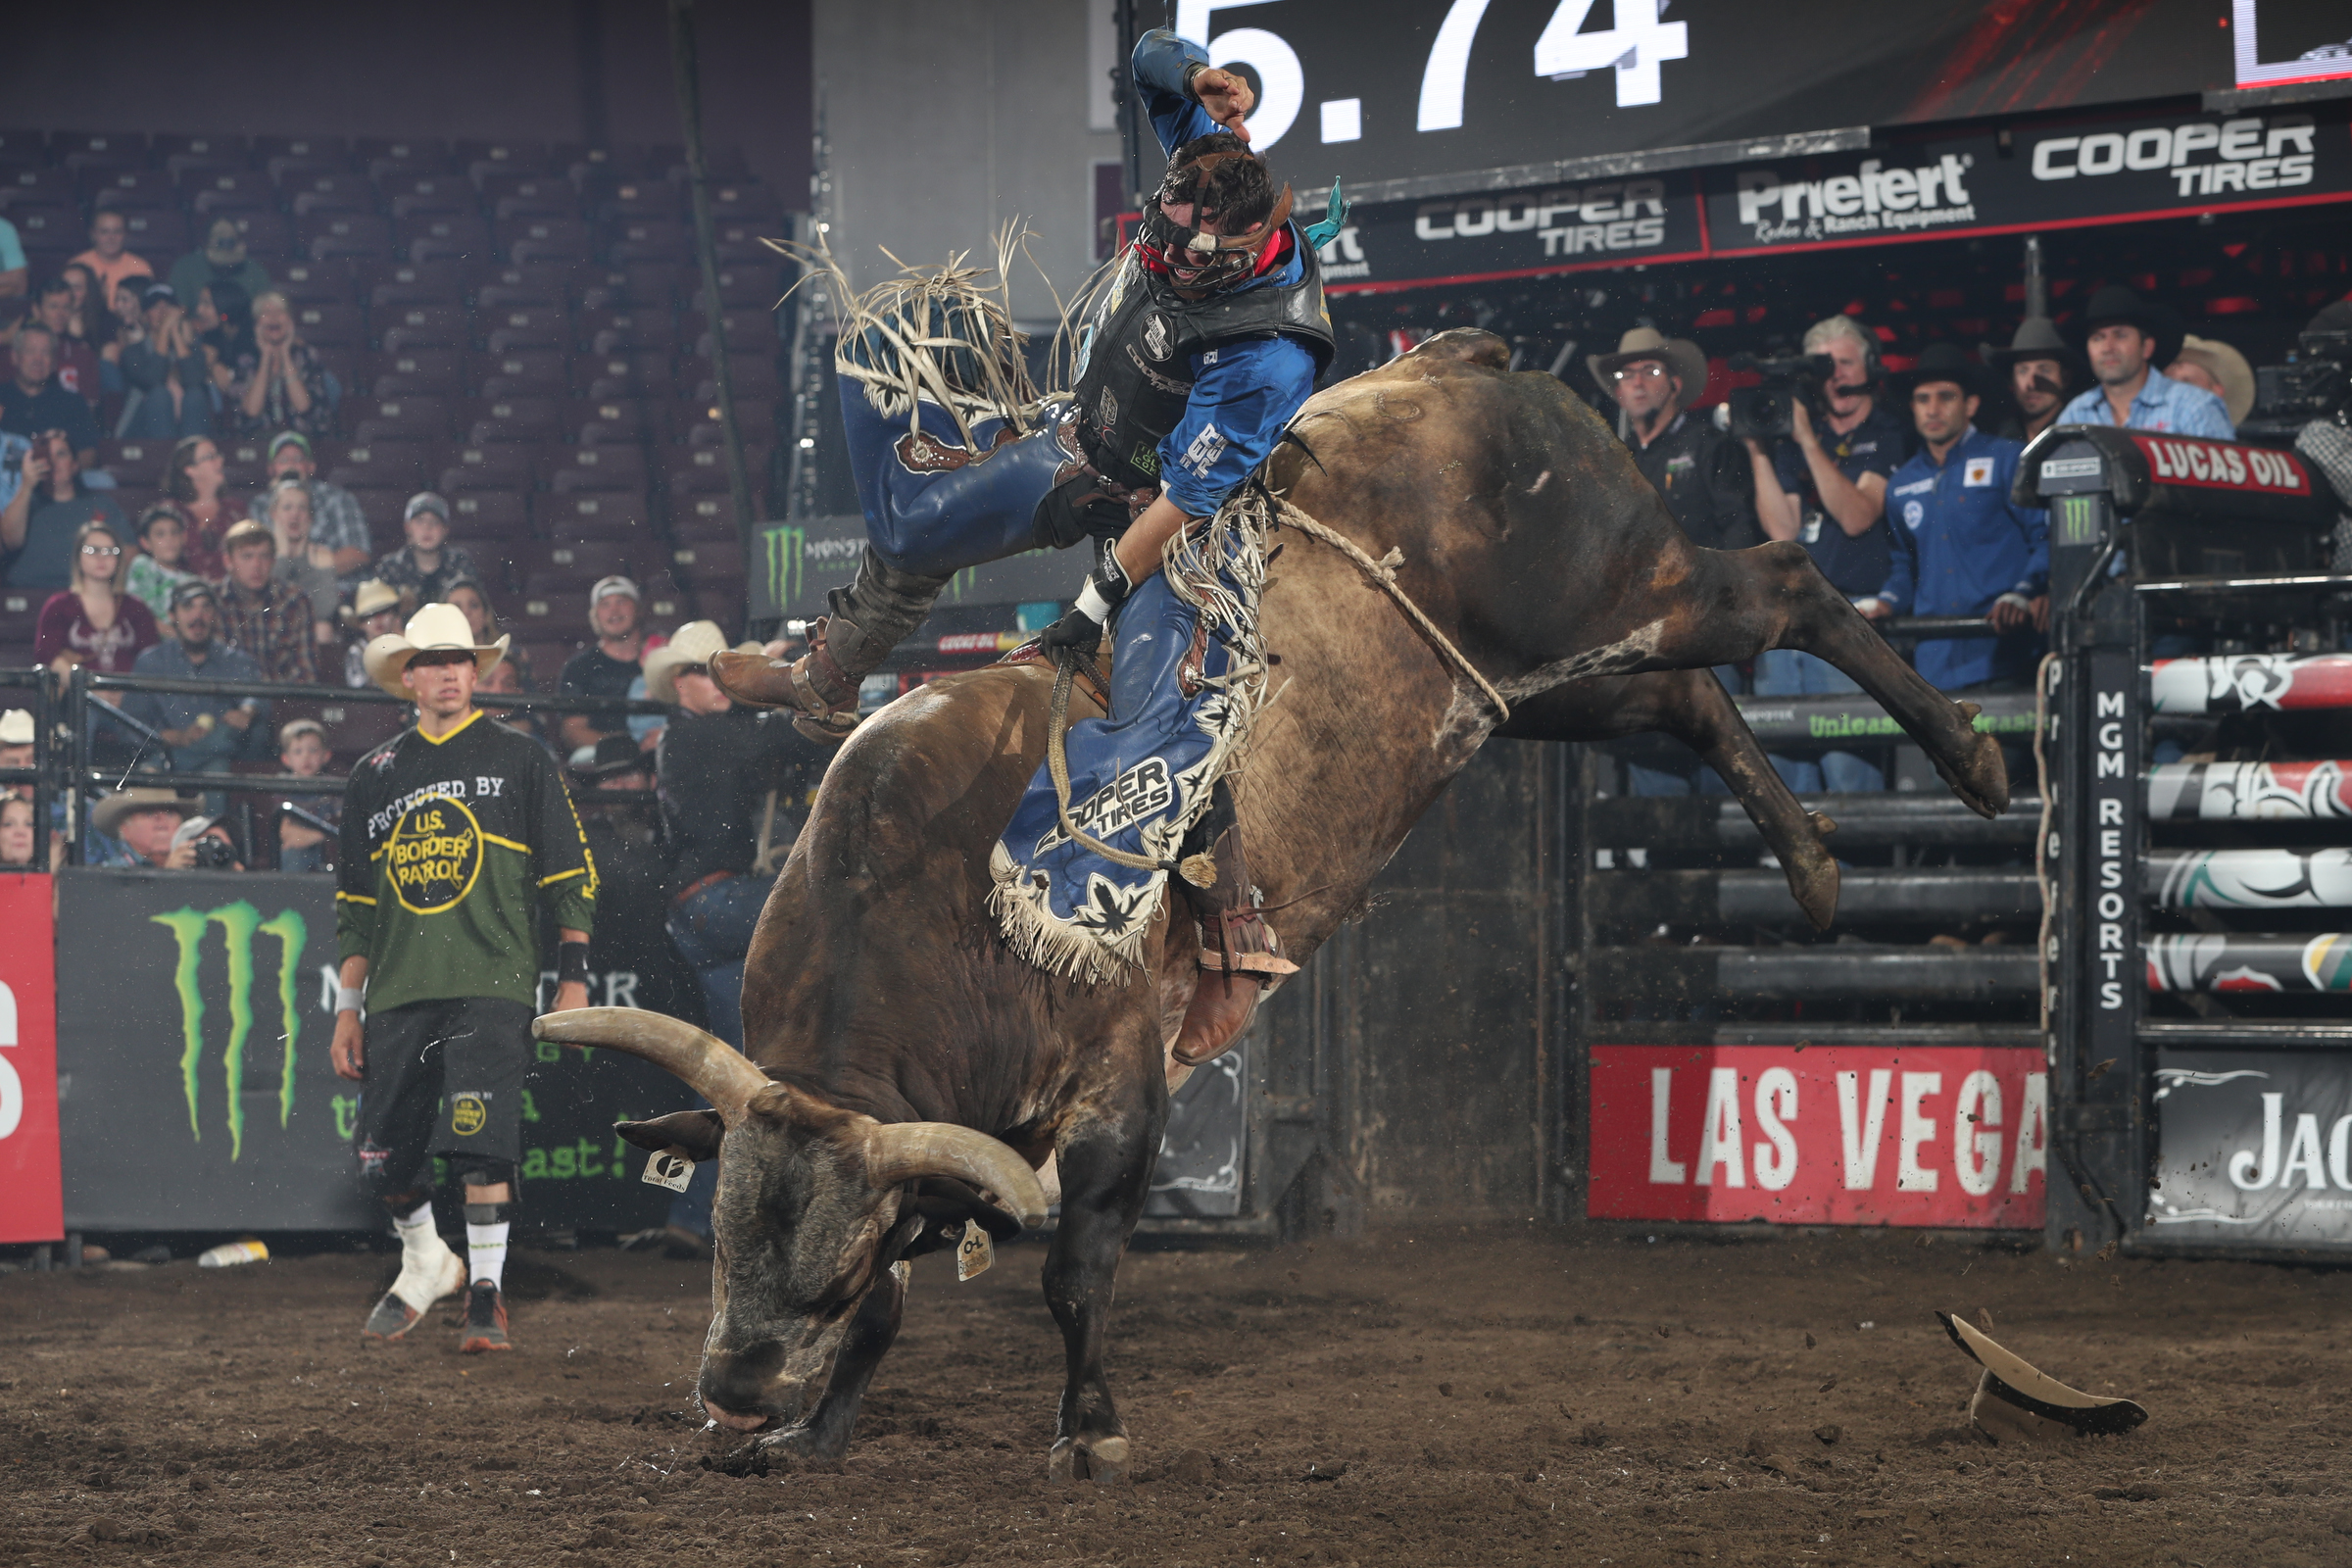 Win Tickets to See Professional Bull Riders Event in Manchester